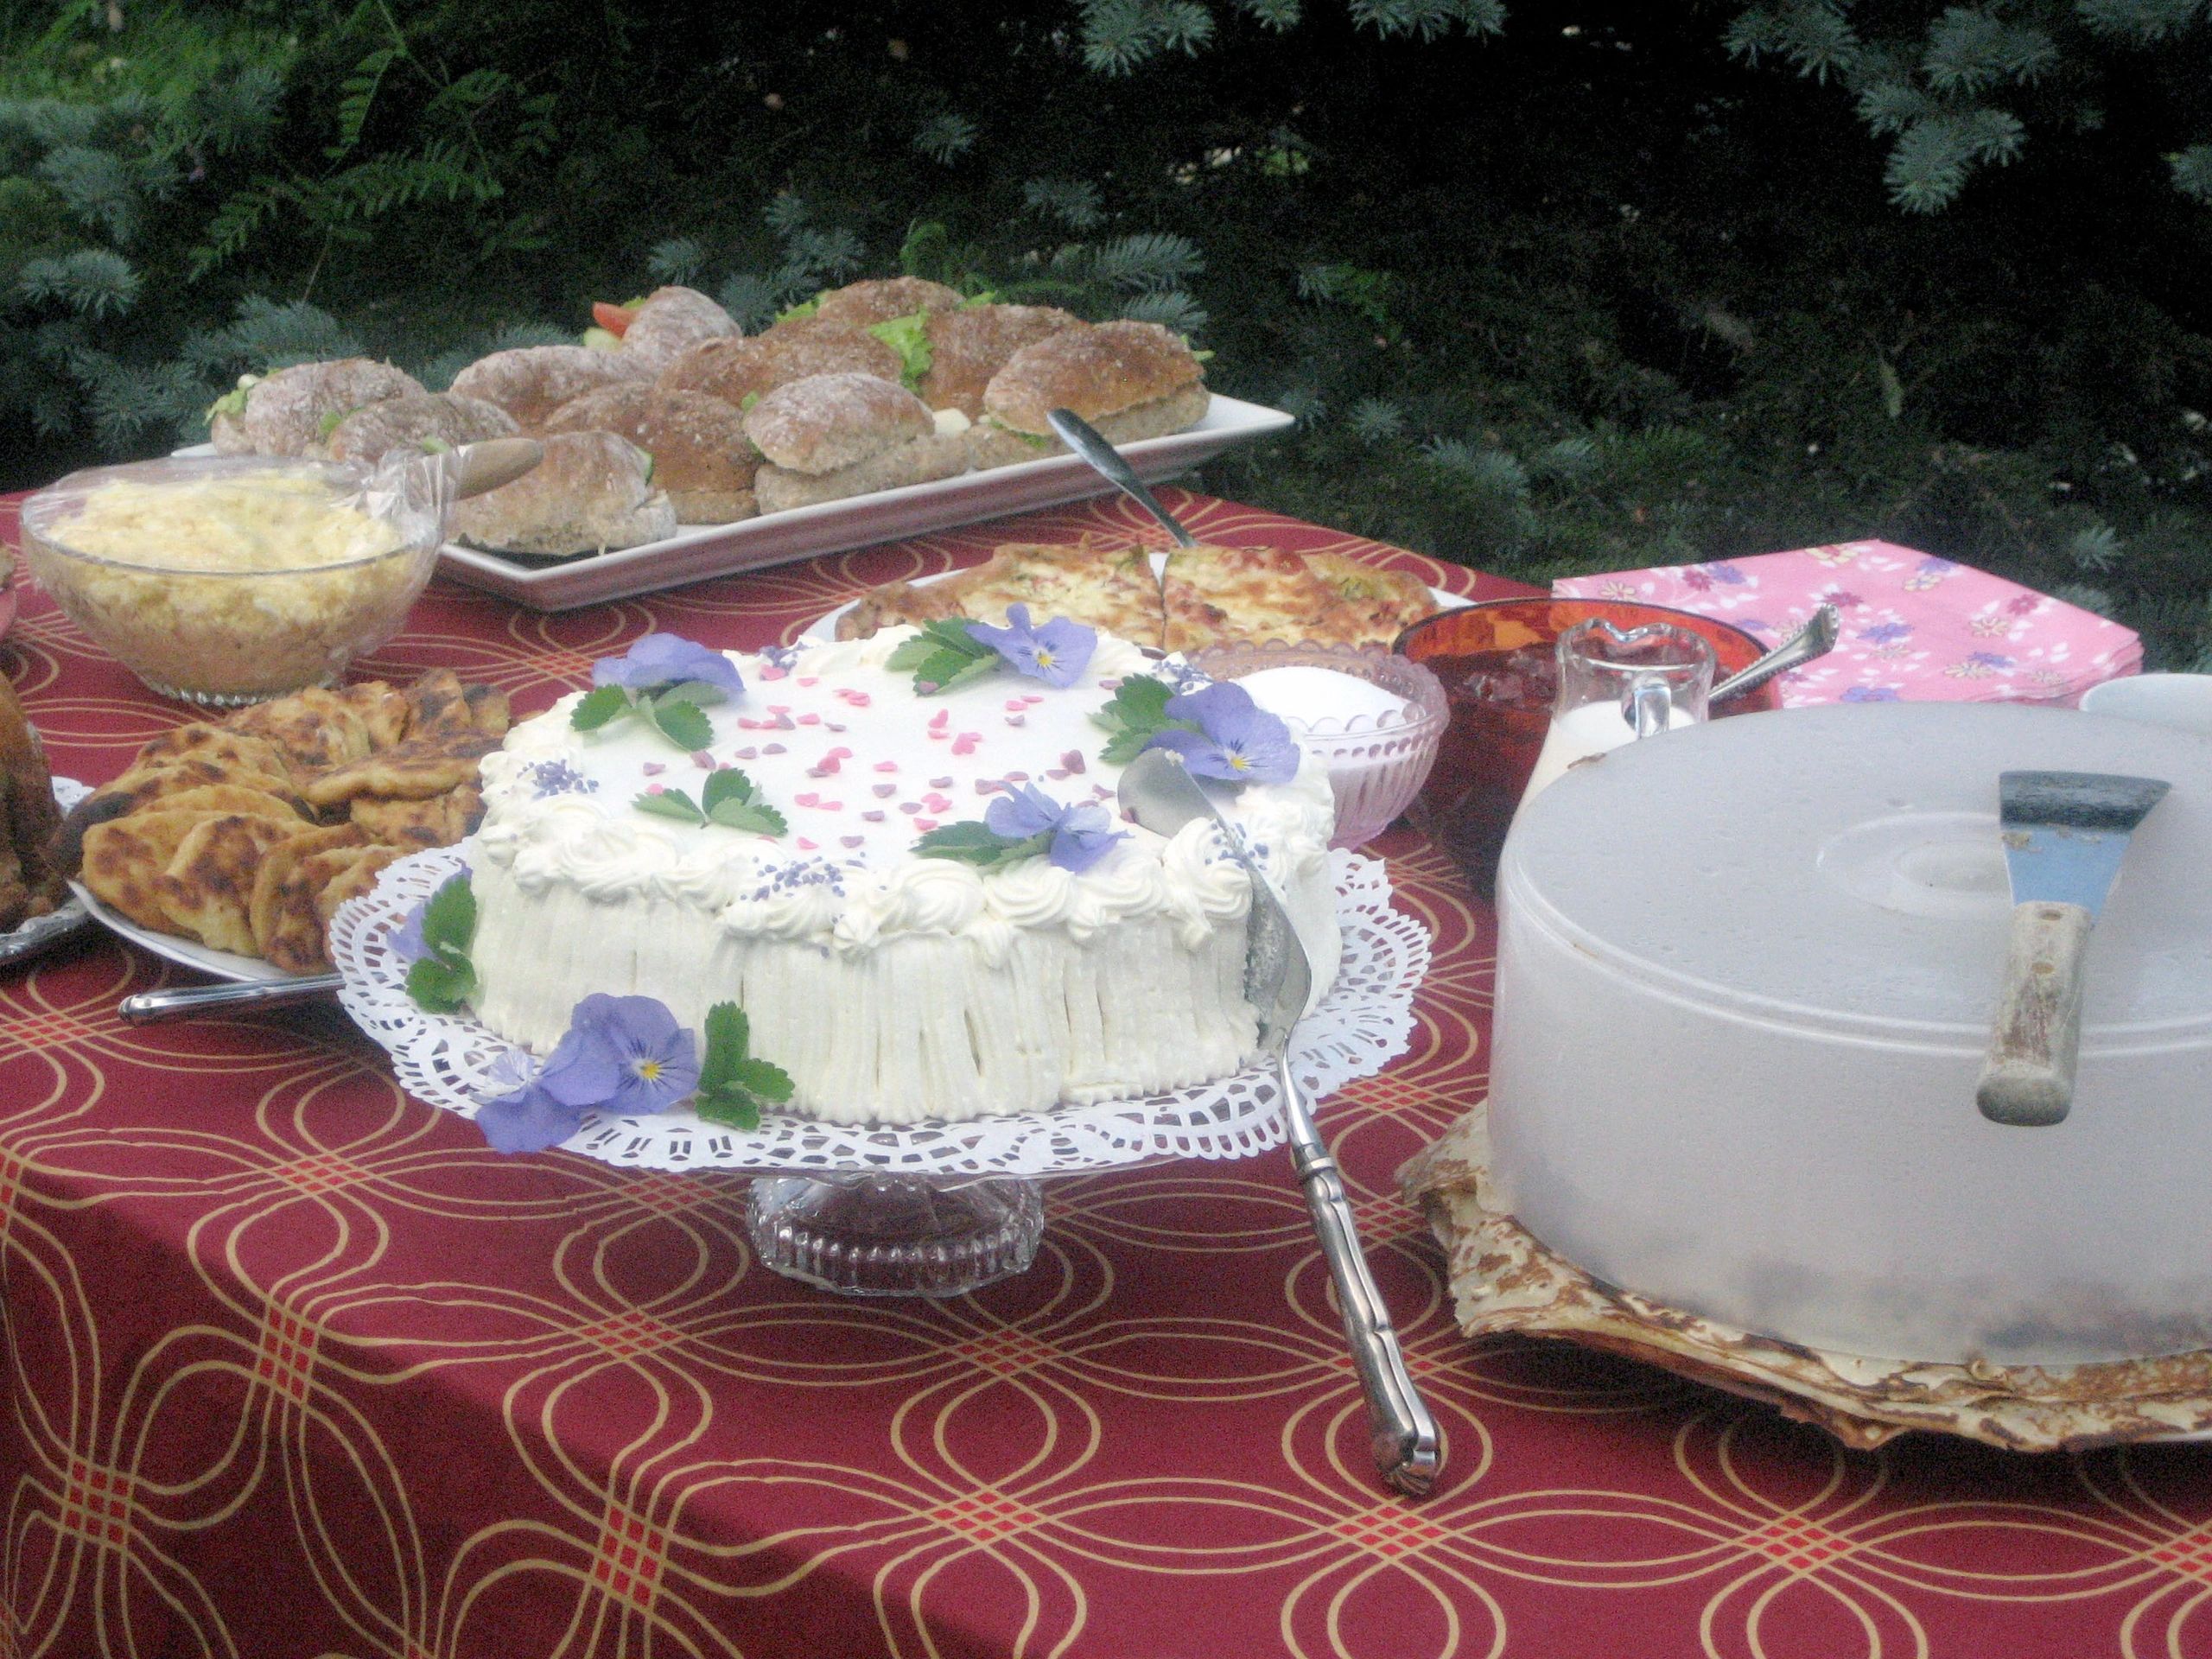 Finnish garden party, complete with cakes and pastries on a table.